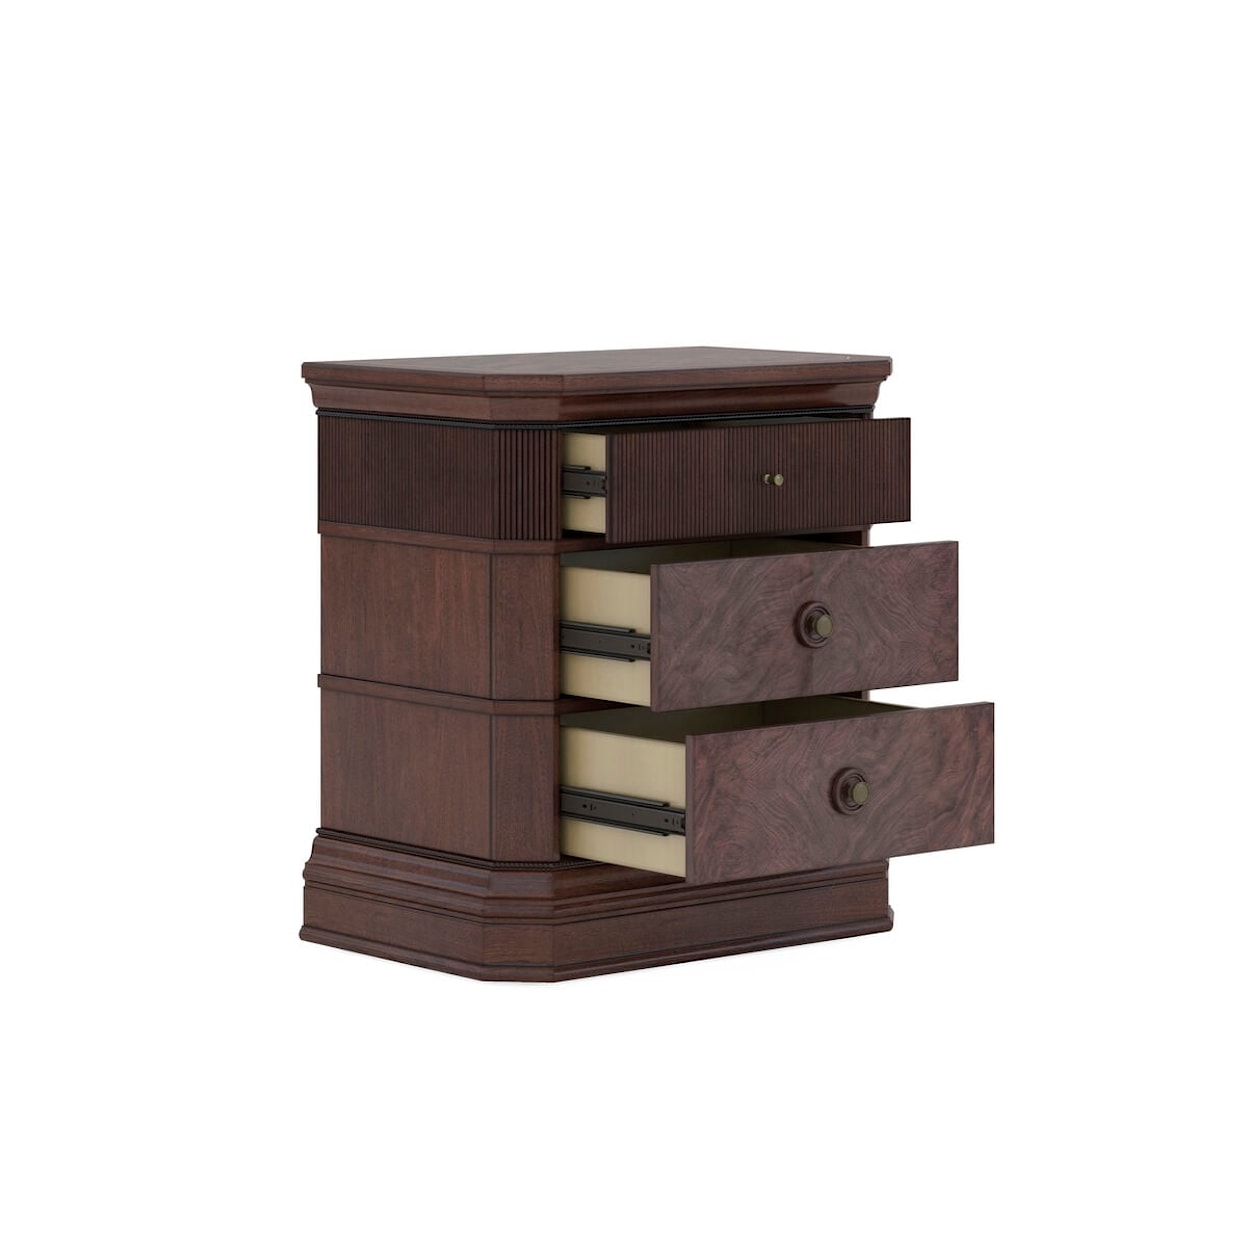 A.R.T. Furniture Inc 328 - Revival Nightstand